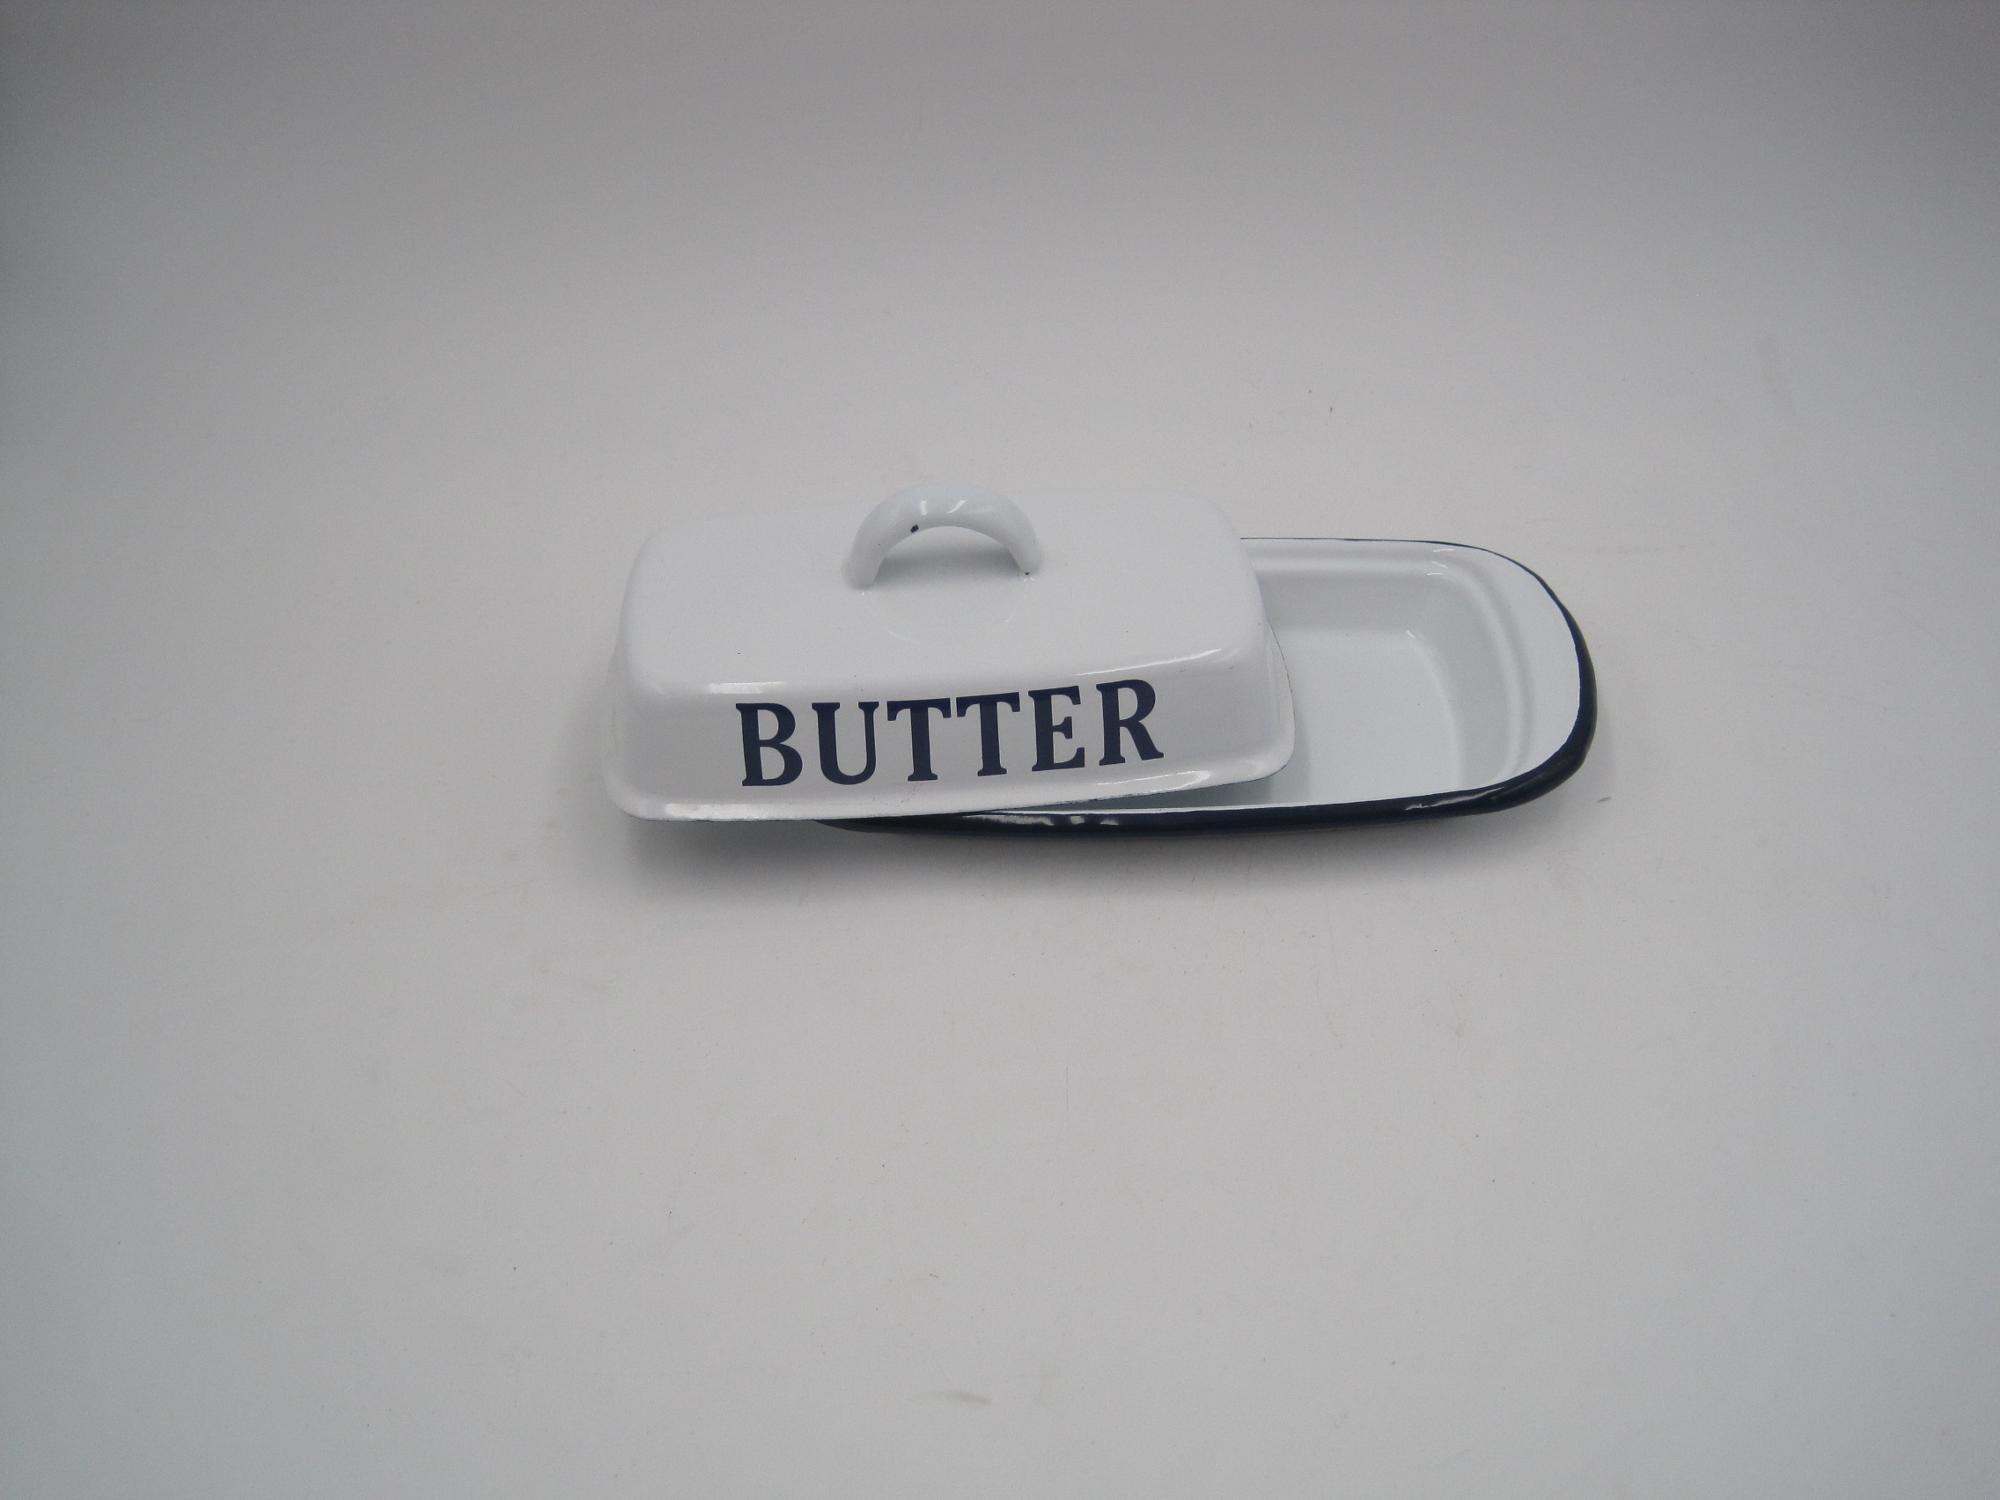 Enamel Butter Dish Butter Box Butter Holder With Lid